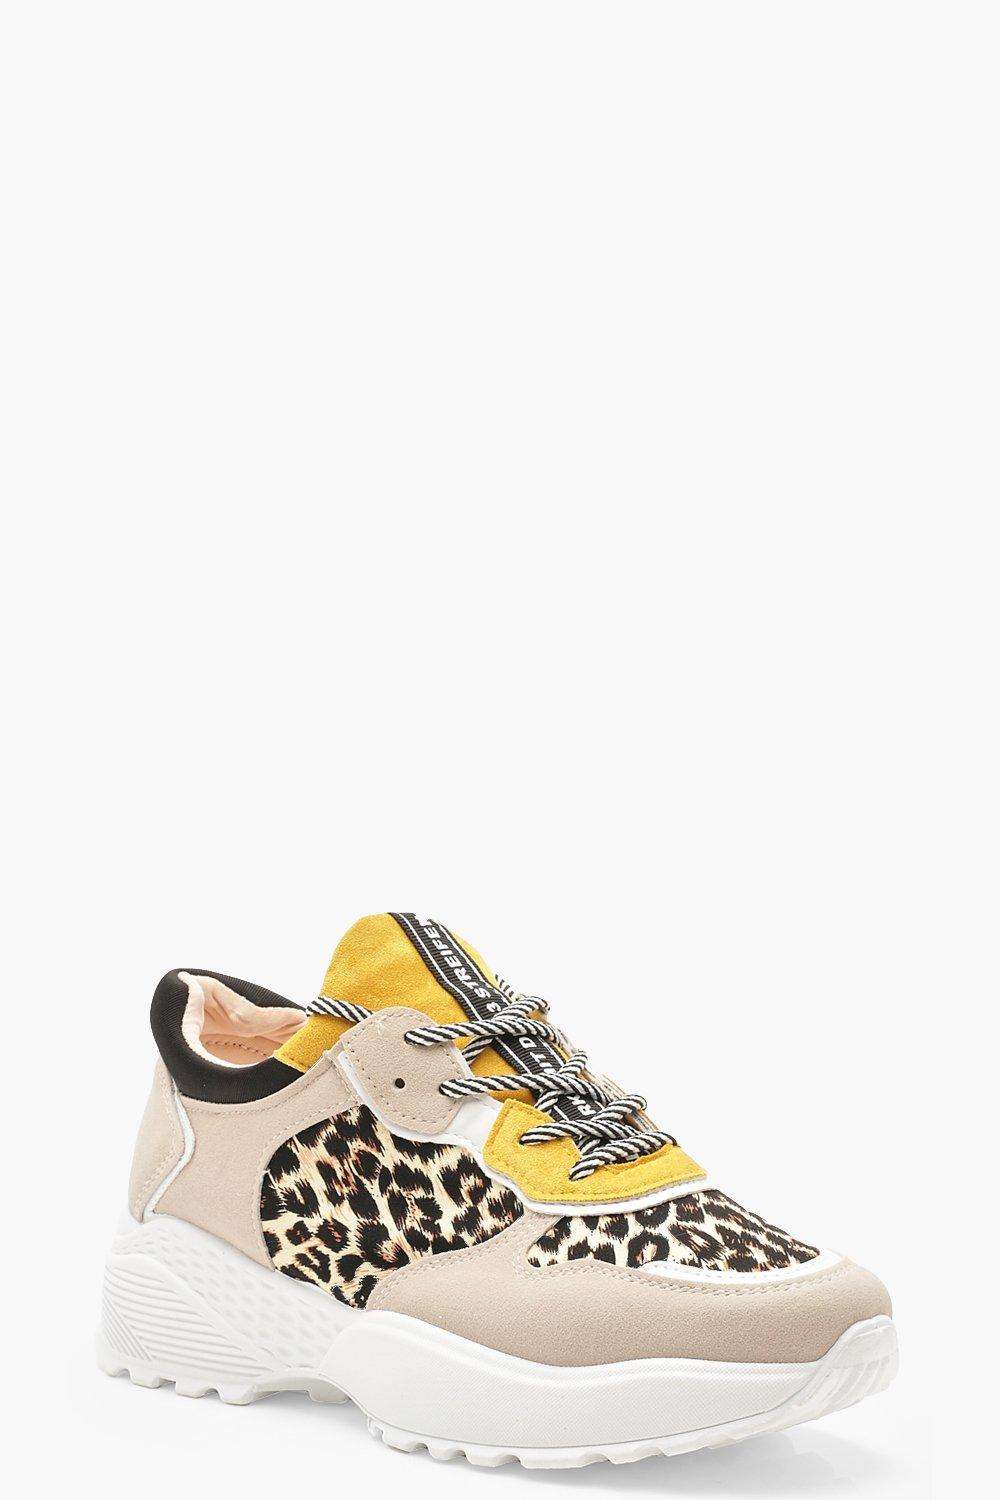 leopard trainers